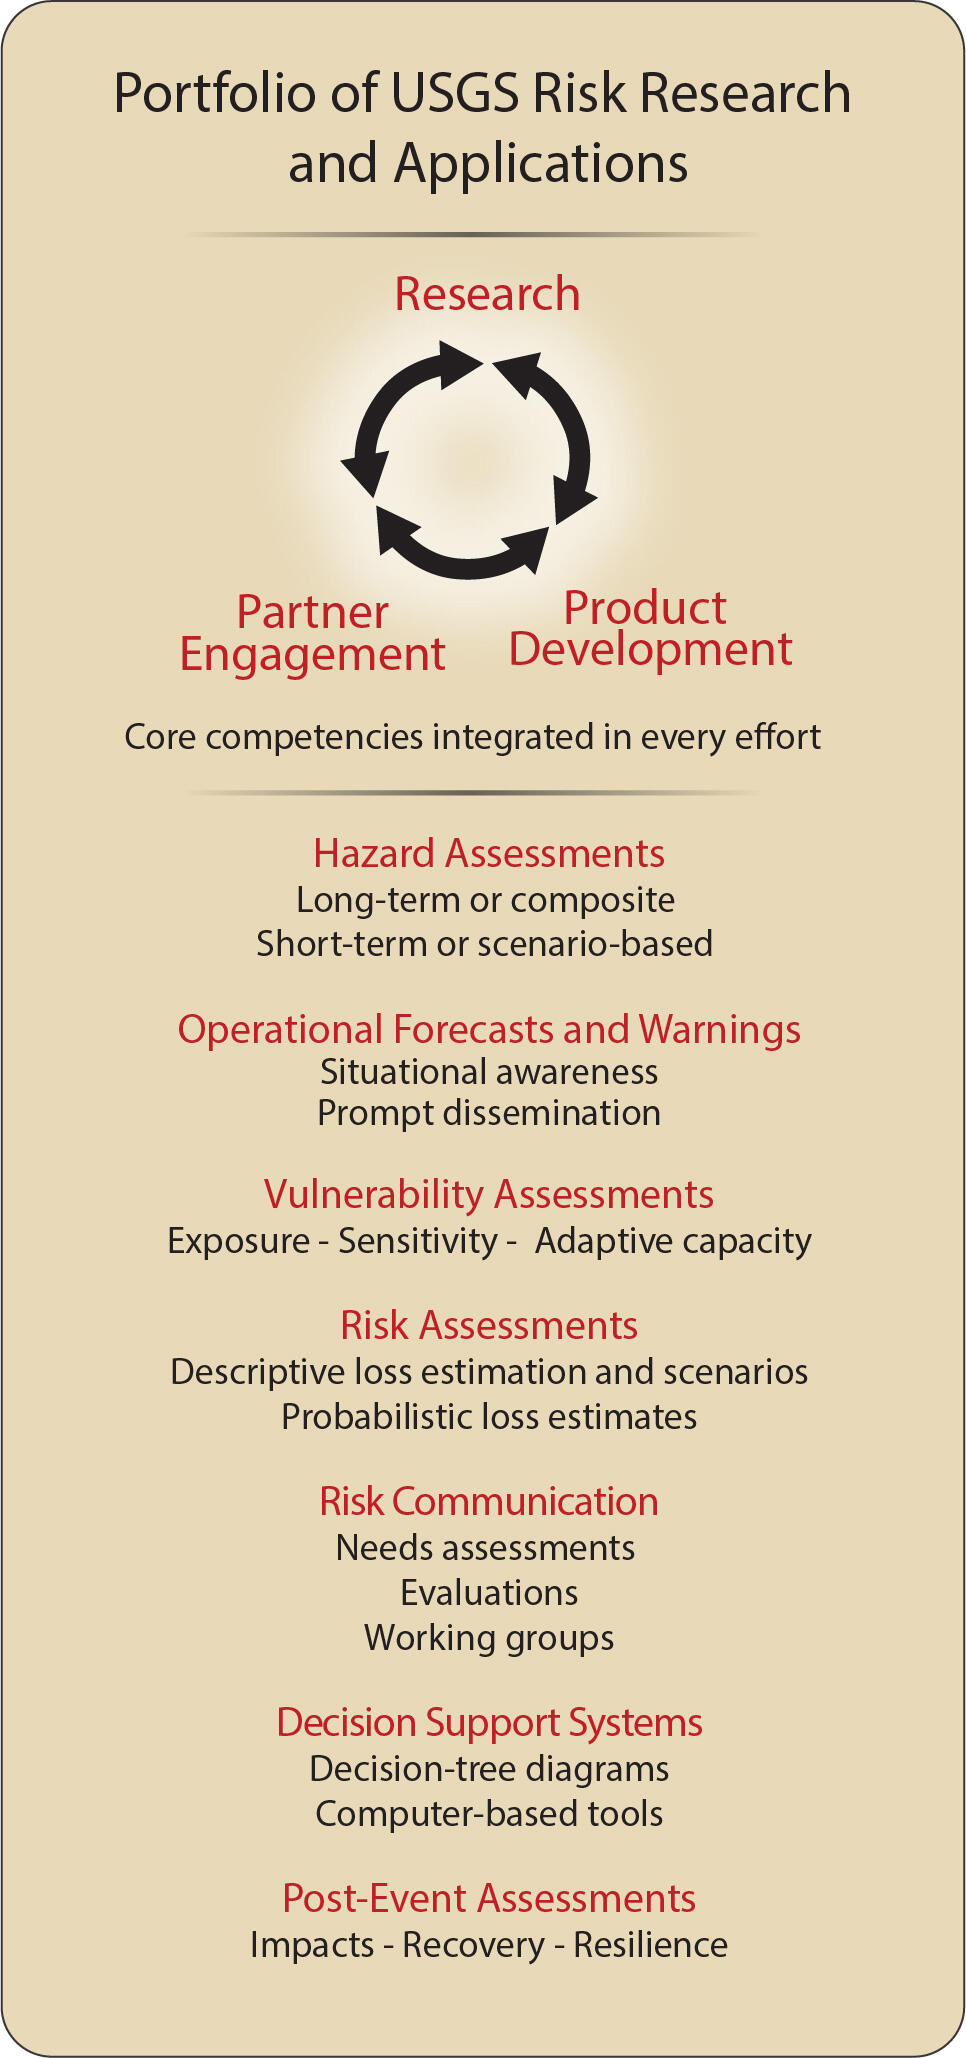 flyer describing portfolio of USGS risk research and applications